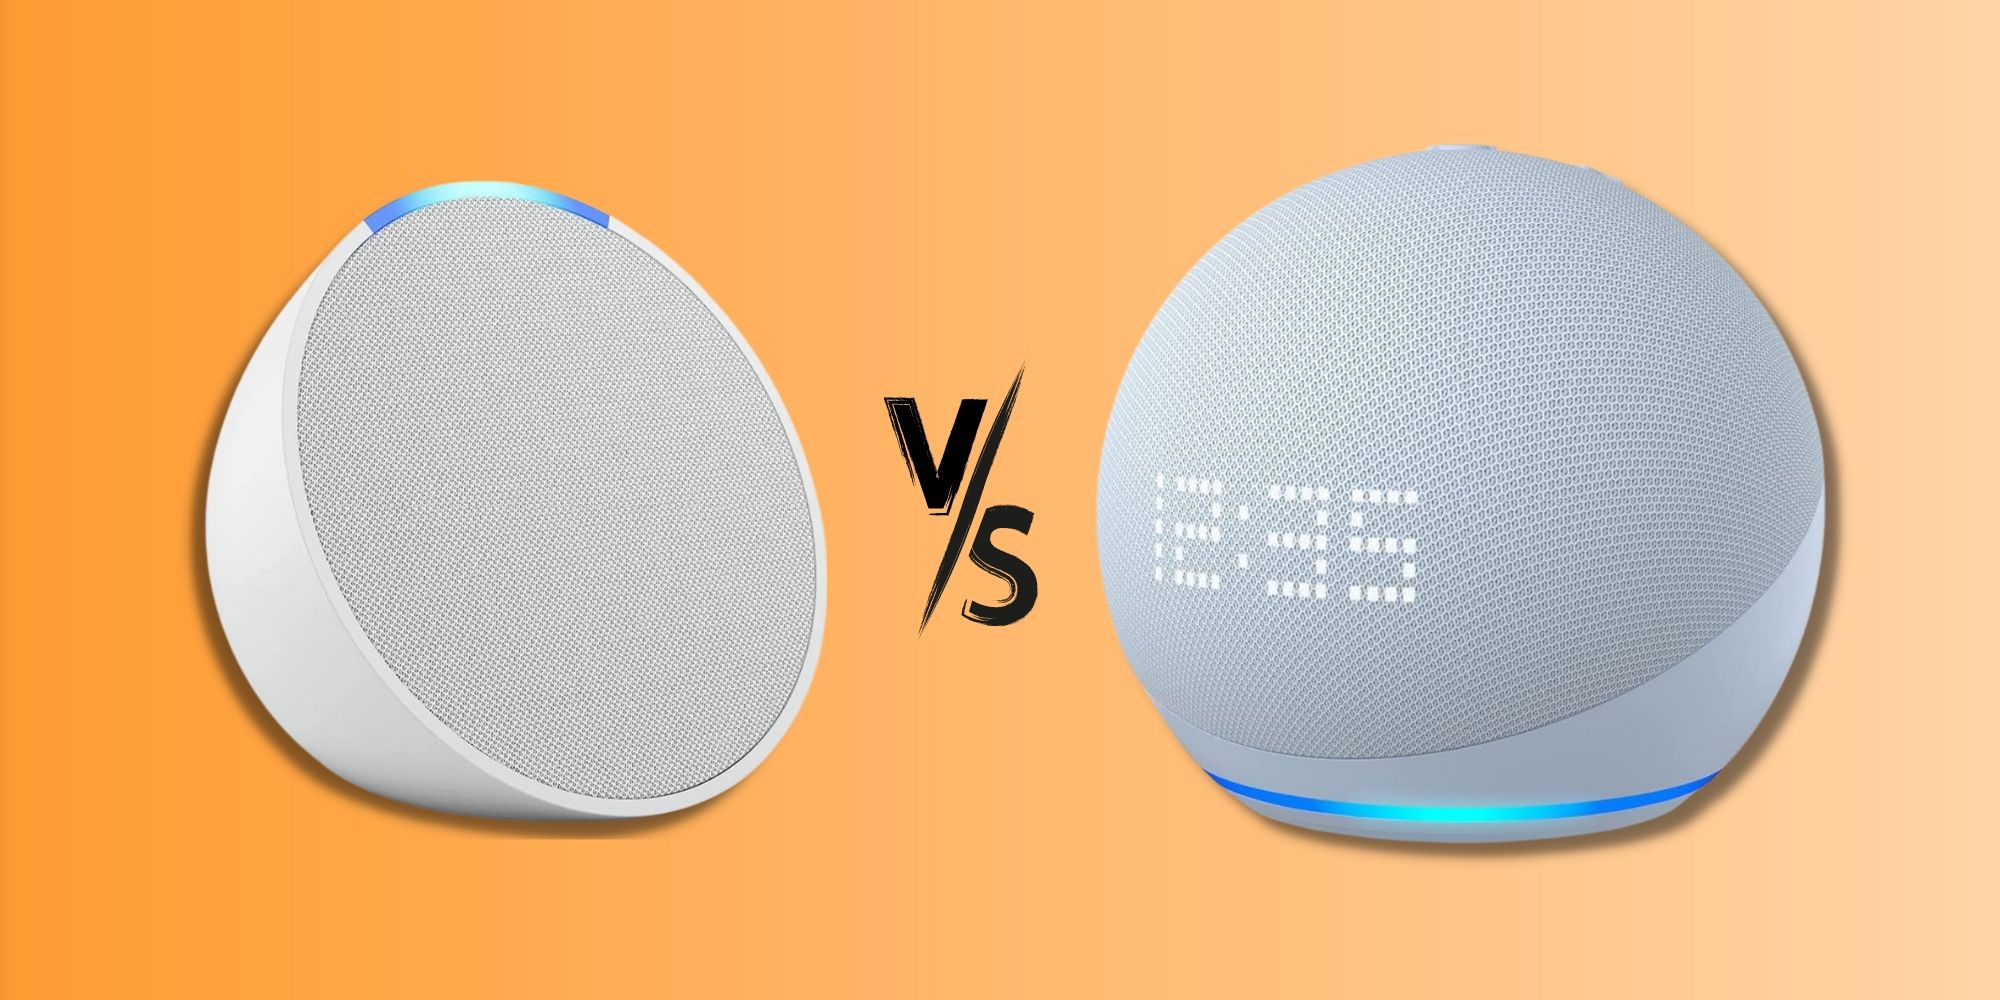 Echo Pop vs. Echo Dot: What's the Difference?